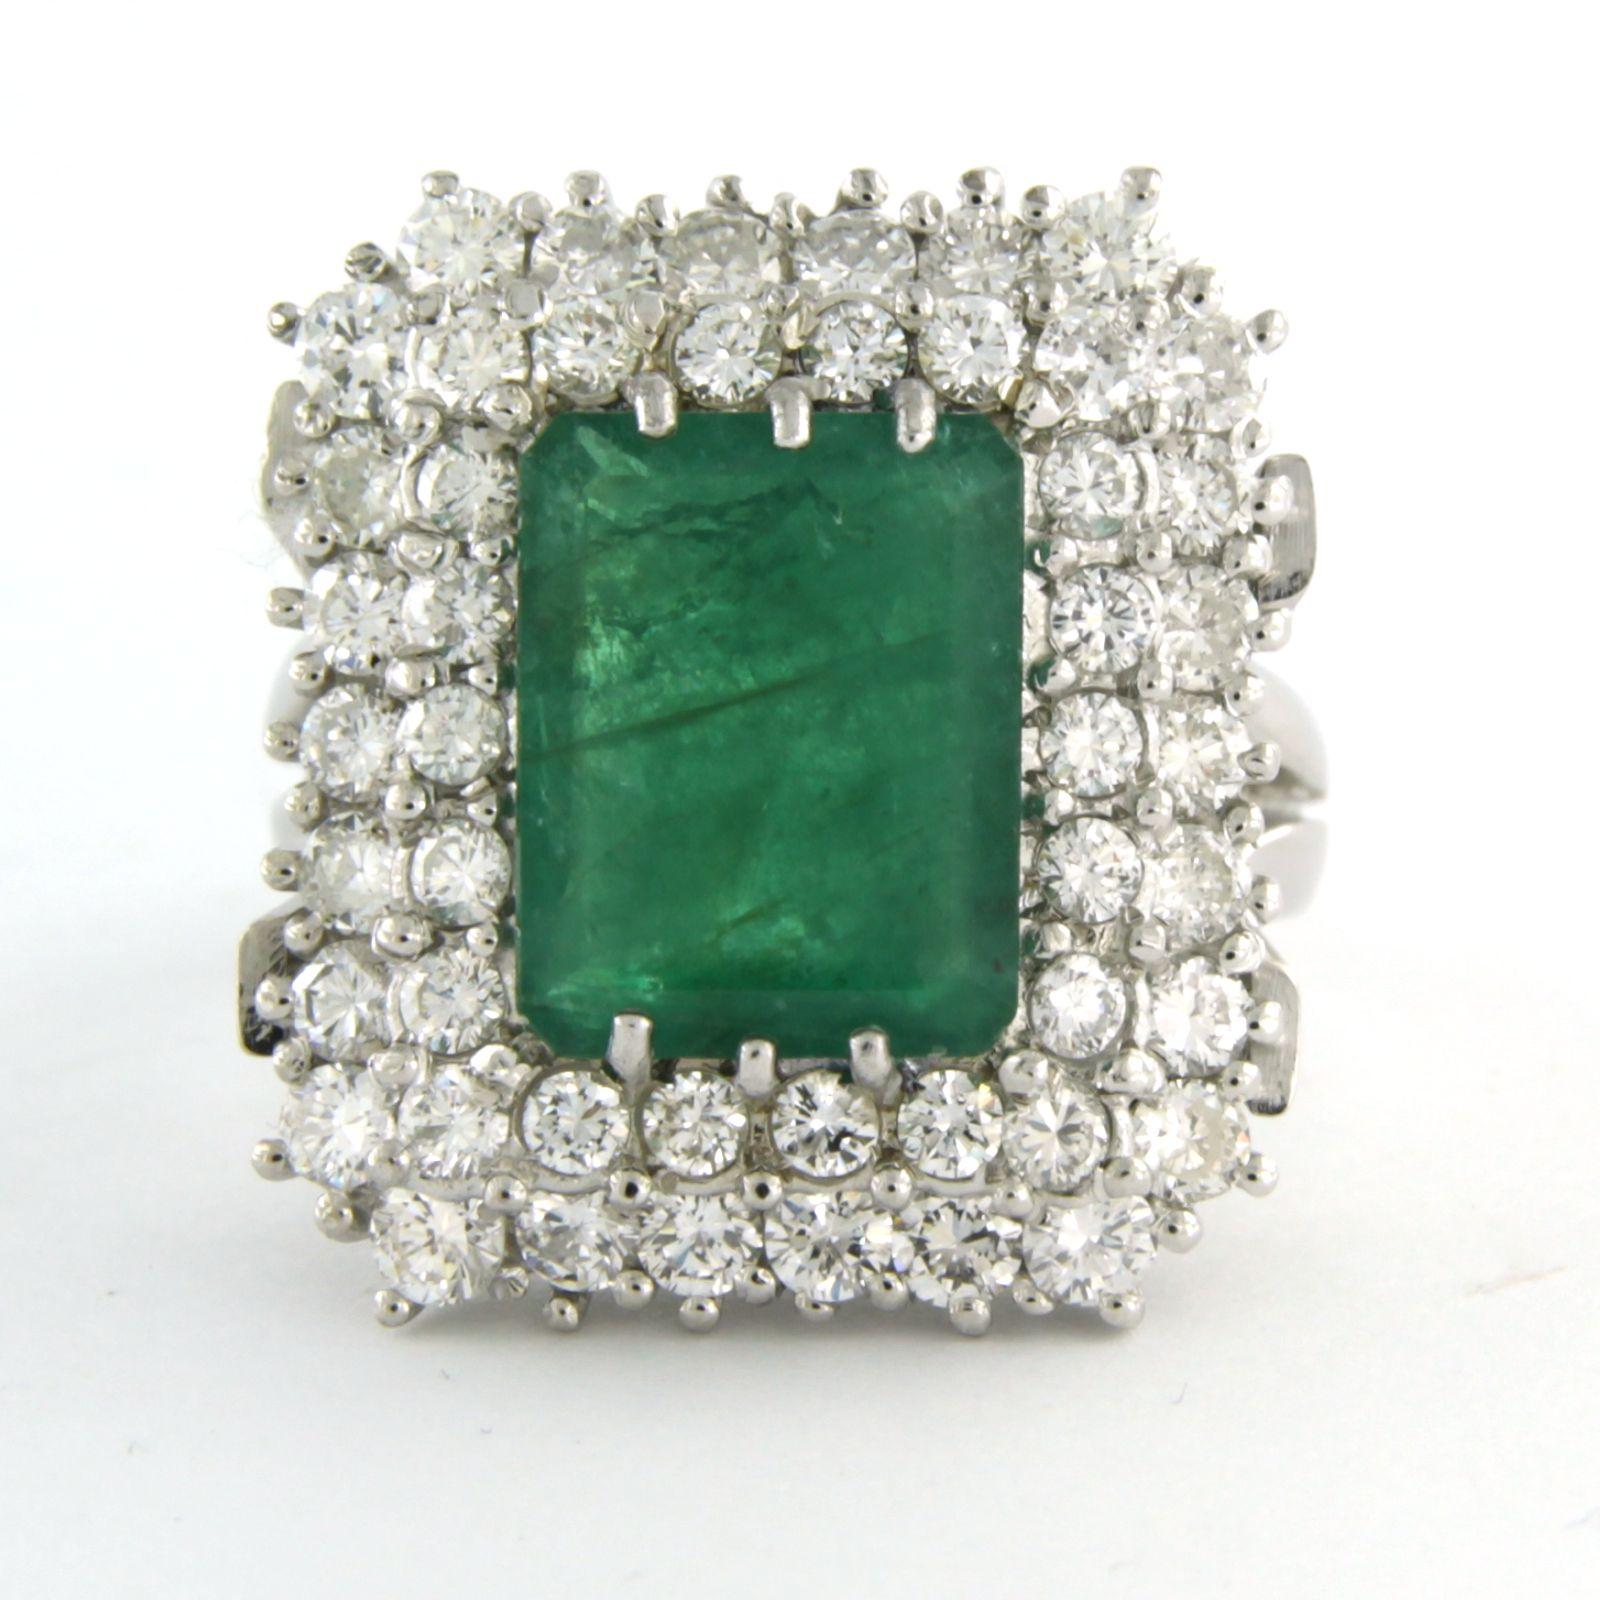 18 kt white cluster ring set with emerald, approximately 2.50 carats in total, surrounded by brilliant cut diamonds up to 1.74 ct - F/G - VS/SI - ring size U.S. 6 – EU. 16.5(52)

detailed description:

The top of the ring is in a rectangle shape of